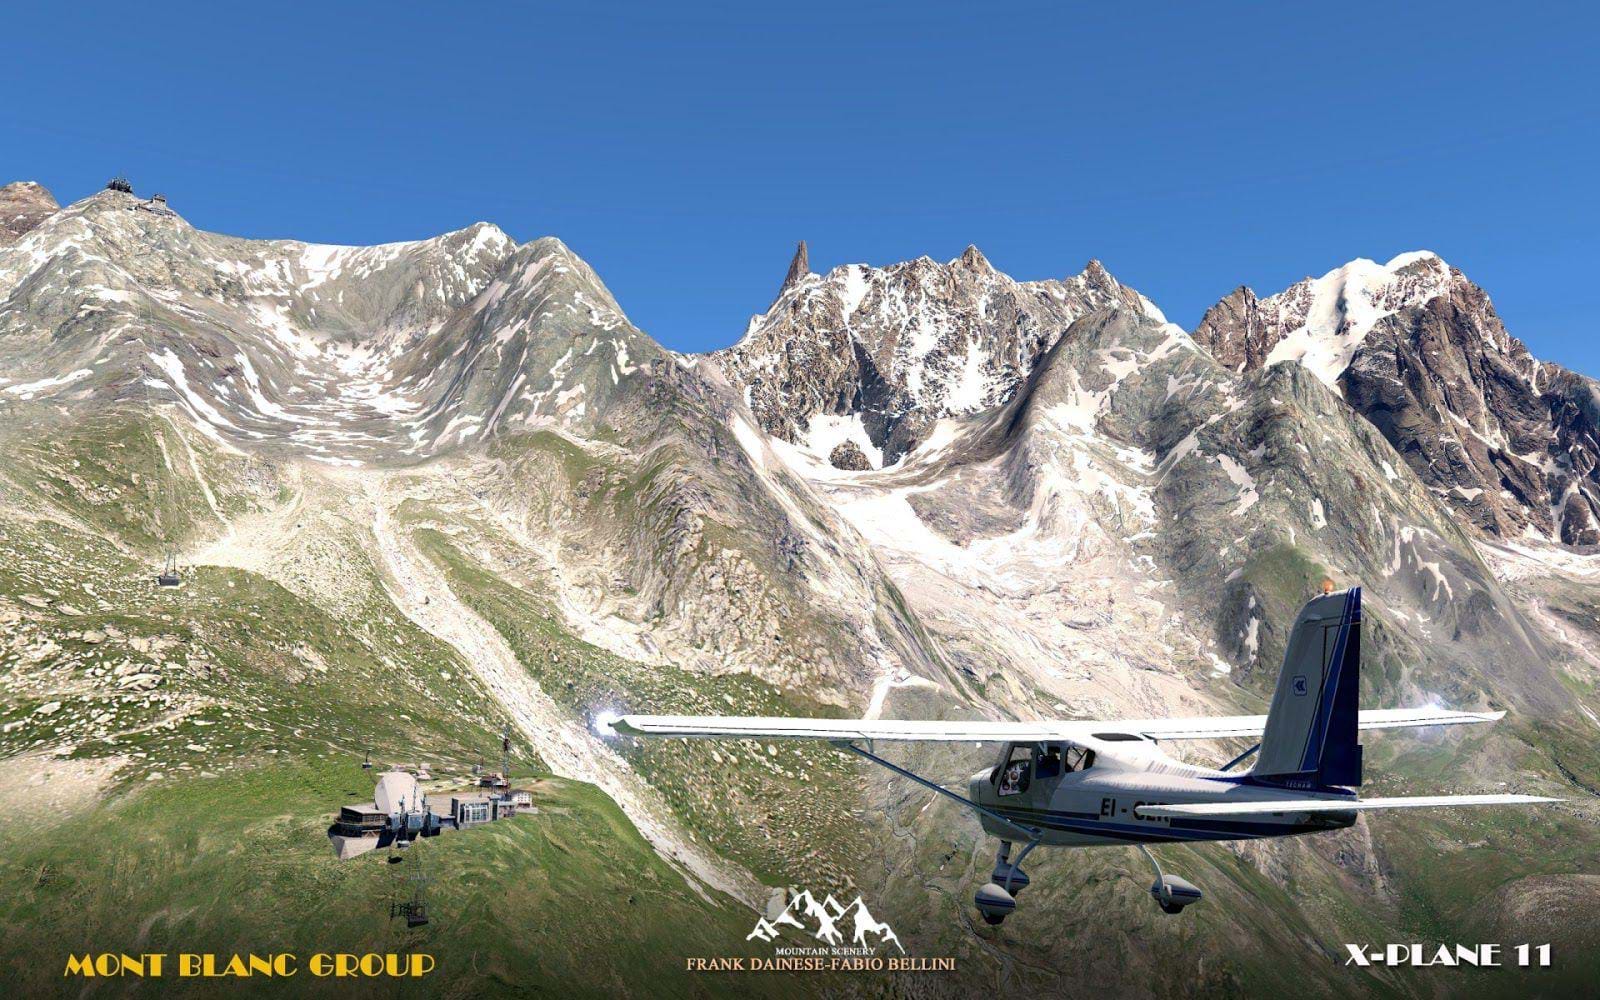 Frank Dainese and Fabio Bellini Mont Blanc for X-Plane